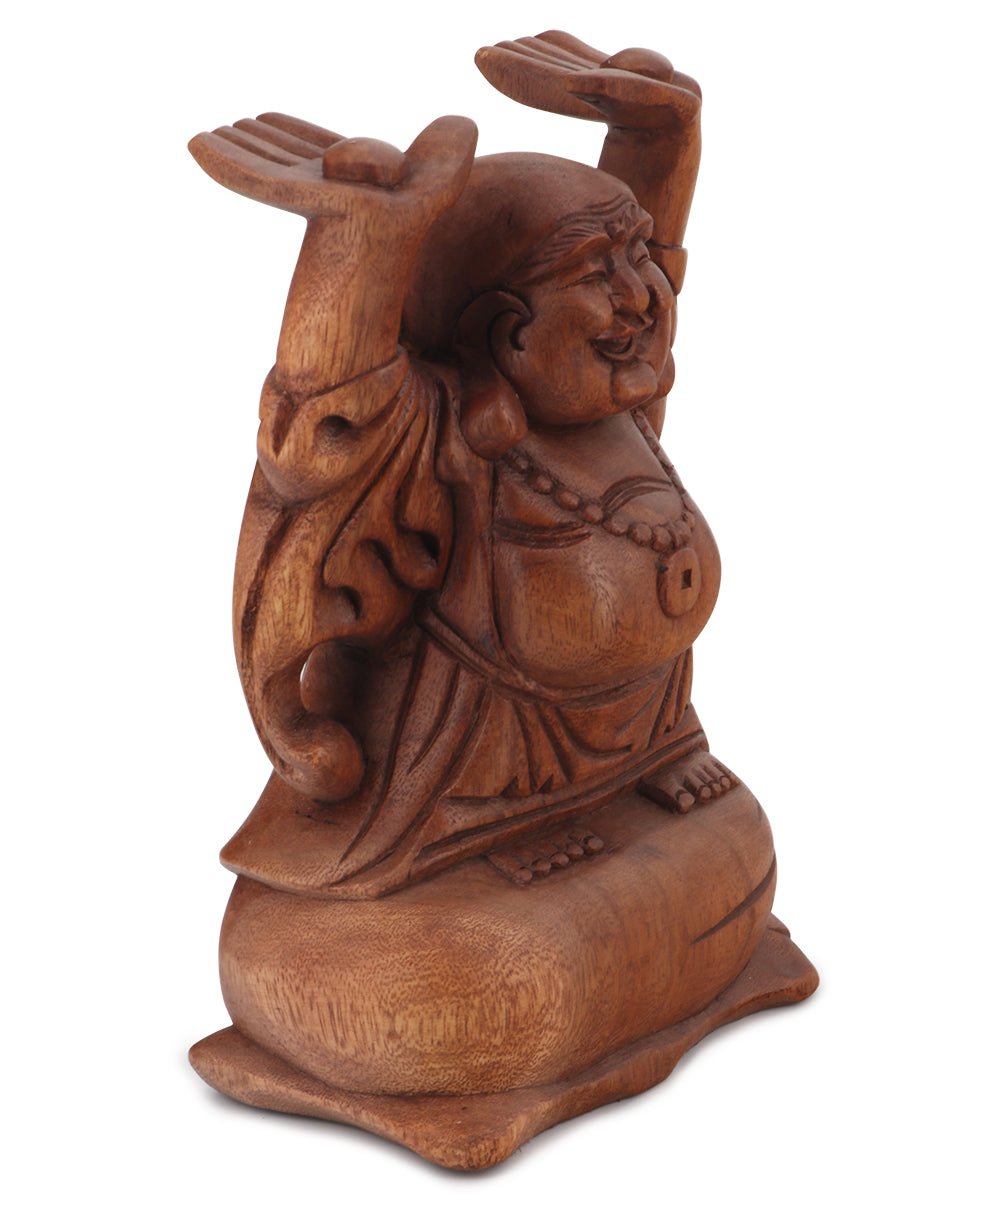 Hand Carved Wood Hotei (Ho Tai or Happy Buddha) Statue - Sculptures & Statues